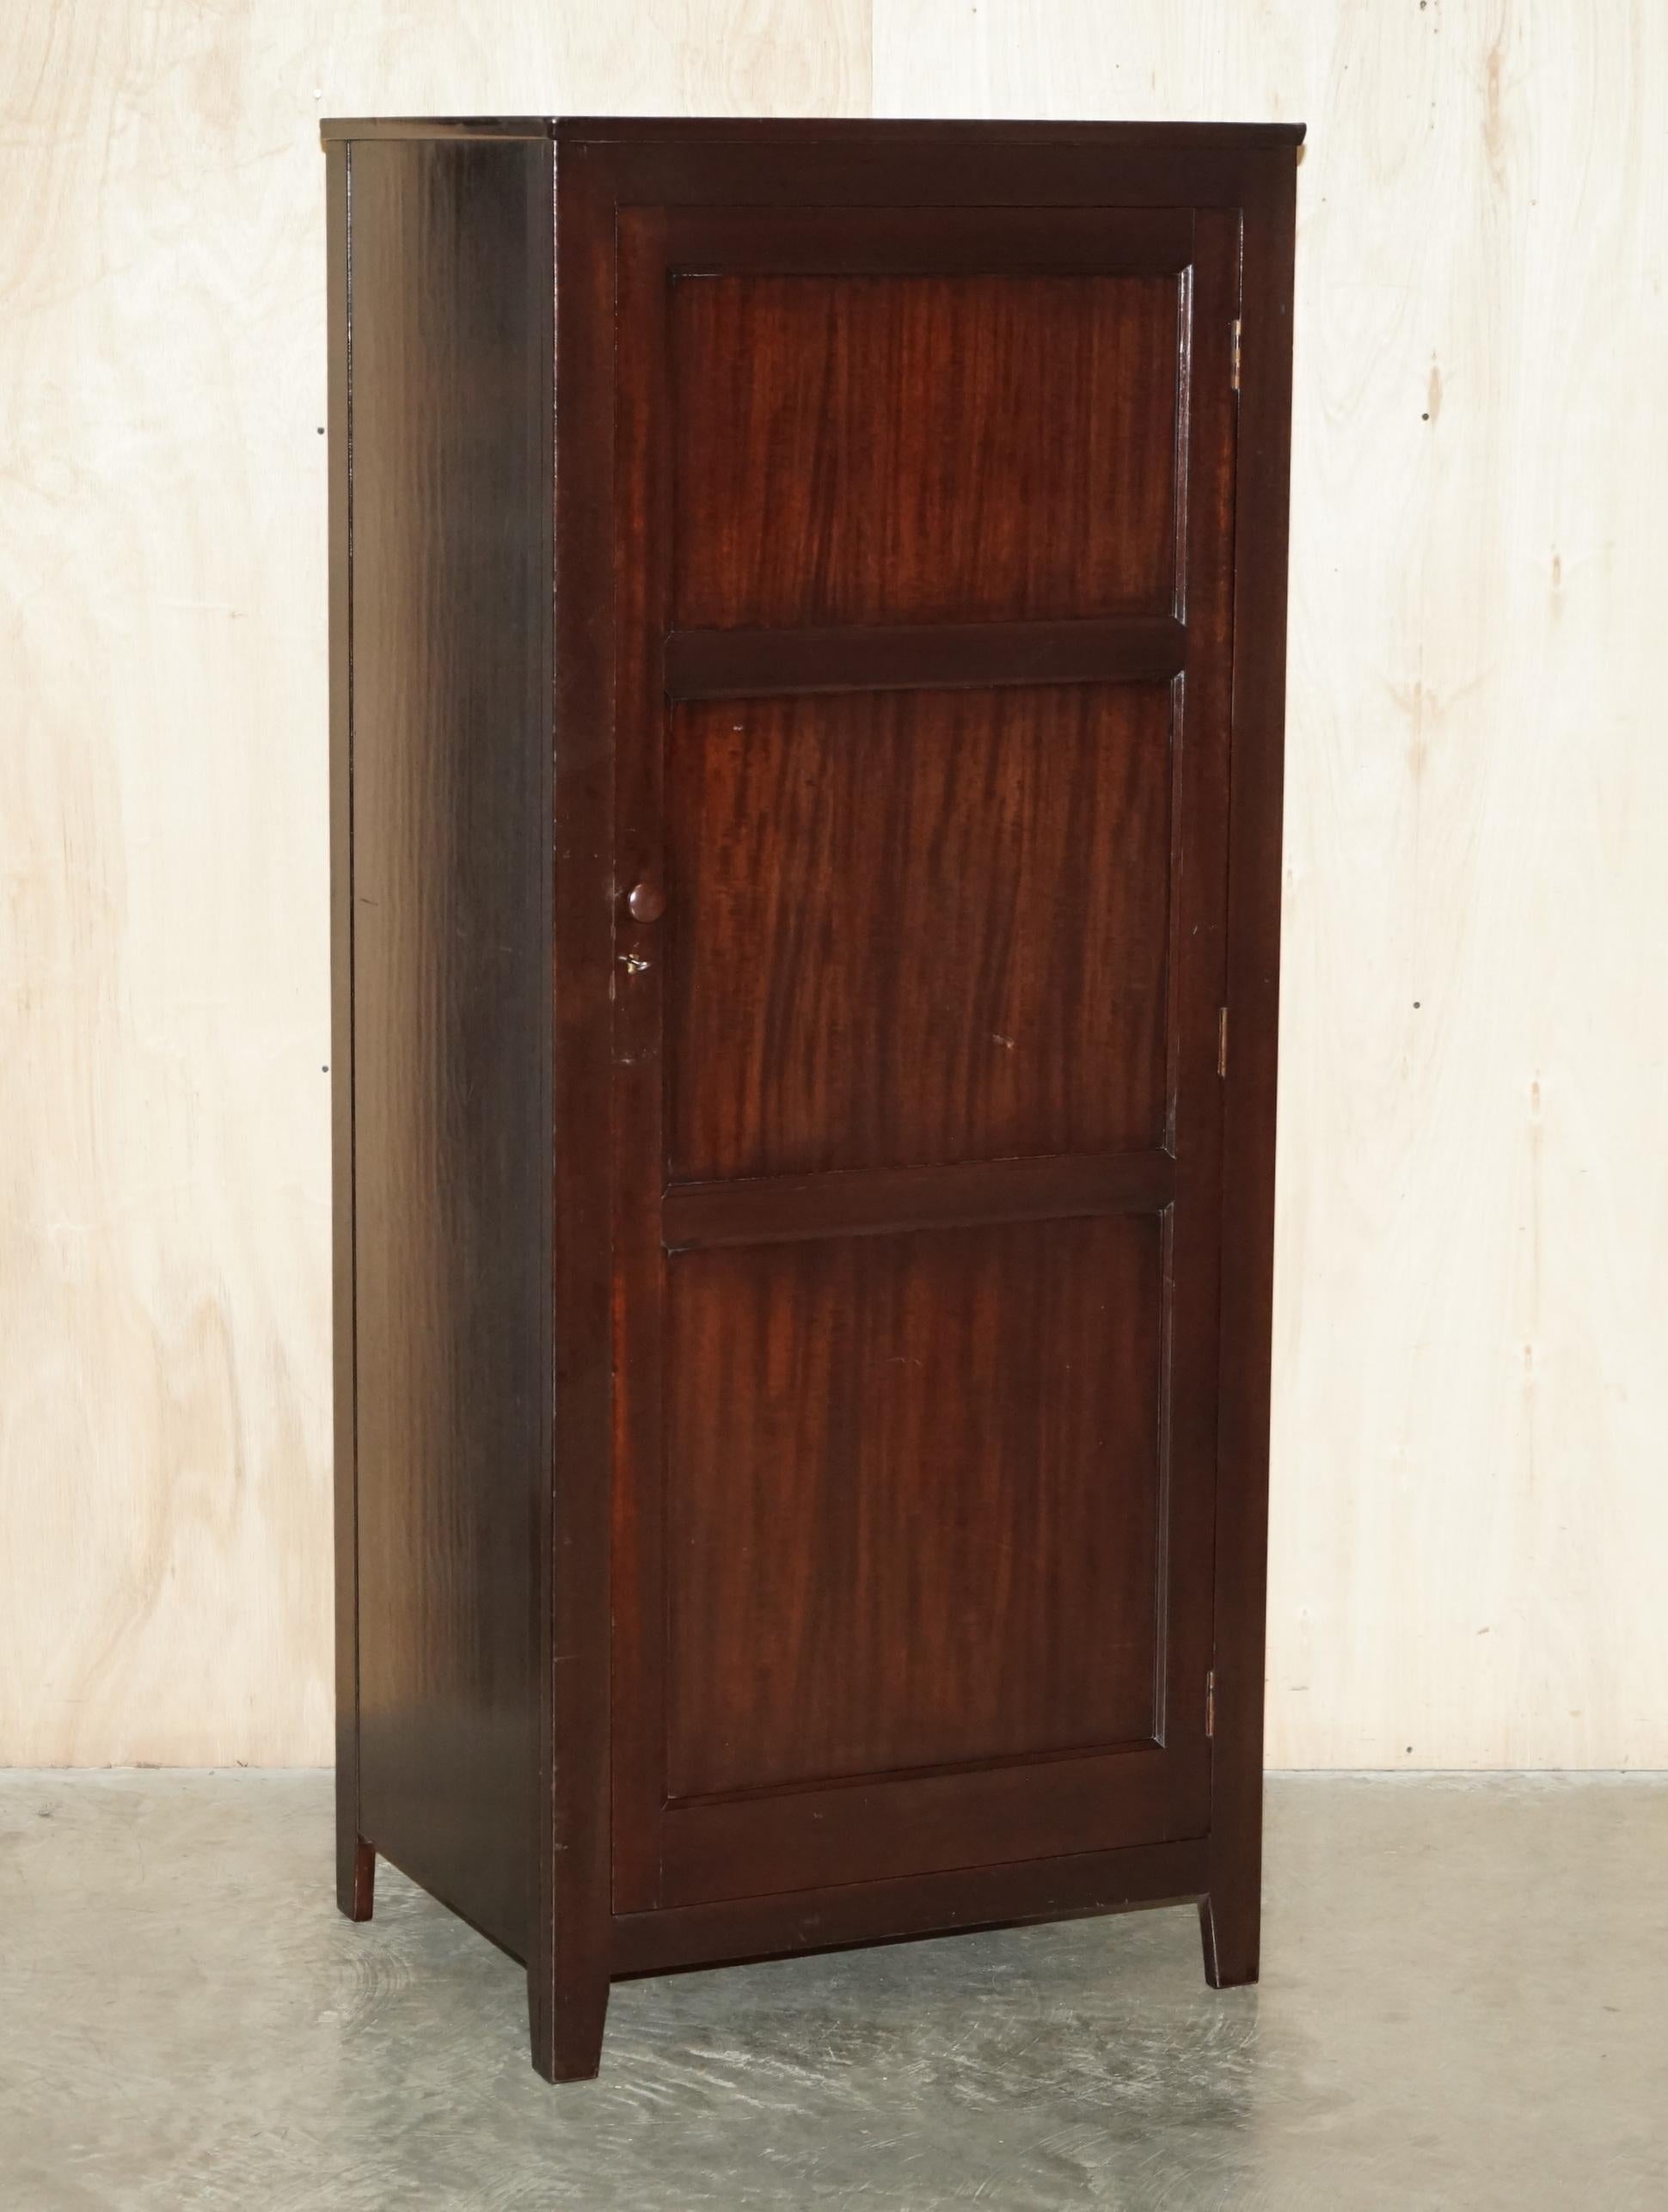 We are delighted to offer for sale this stunning pair of original 1962 Air Ministry single door wardrobes or cloak cupboards.

A good looking and well made pair of full length wardrobes that can also be used as cloak cupboards, they are part of a